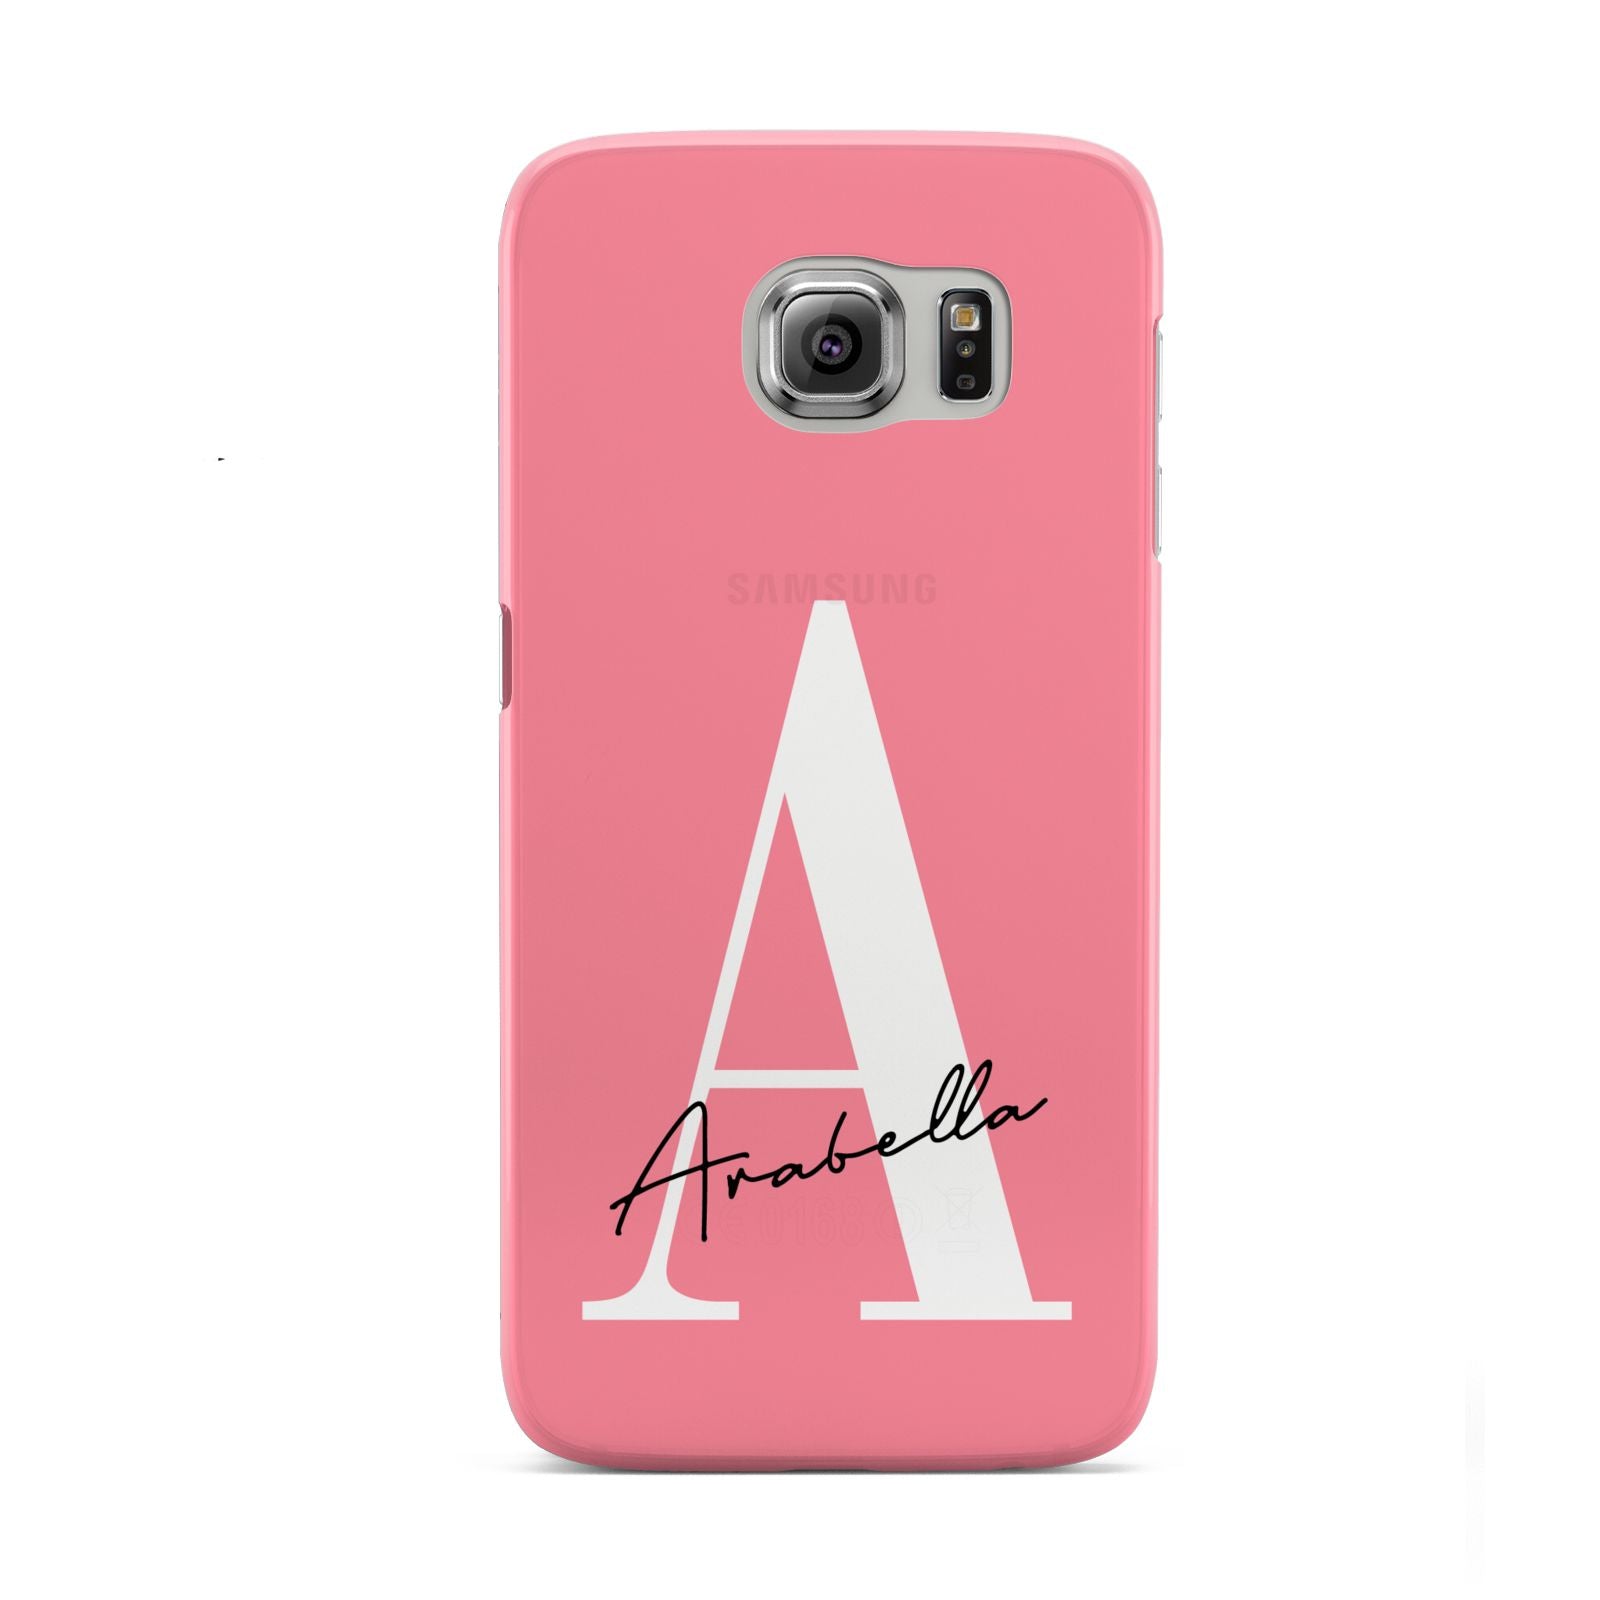 Personalised Pink White Initial Samsung Galaxy S6 Case